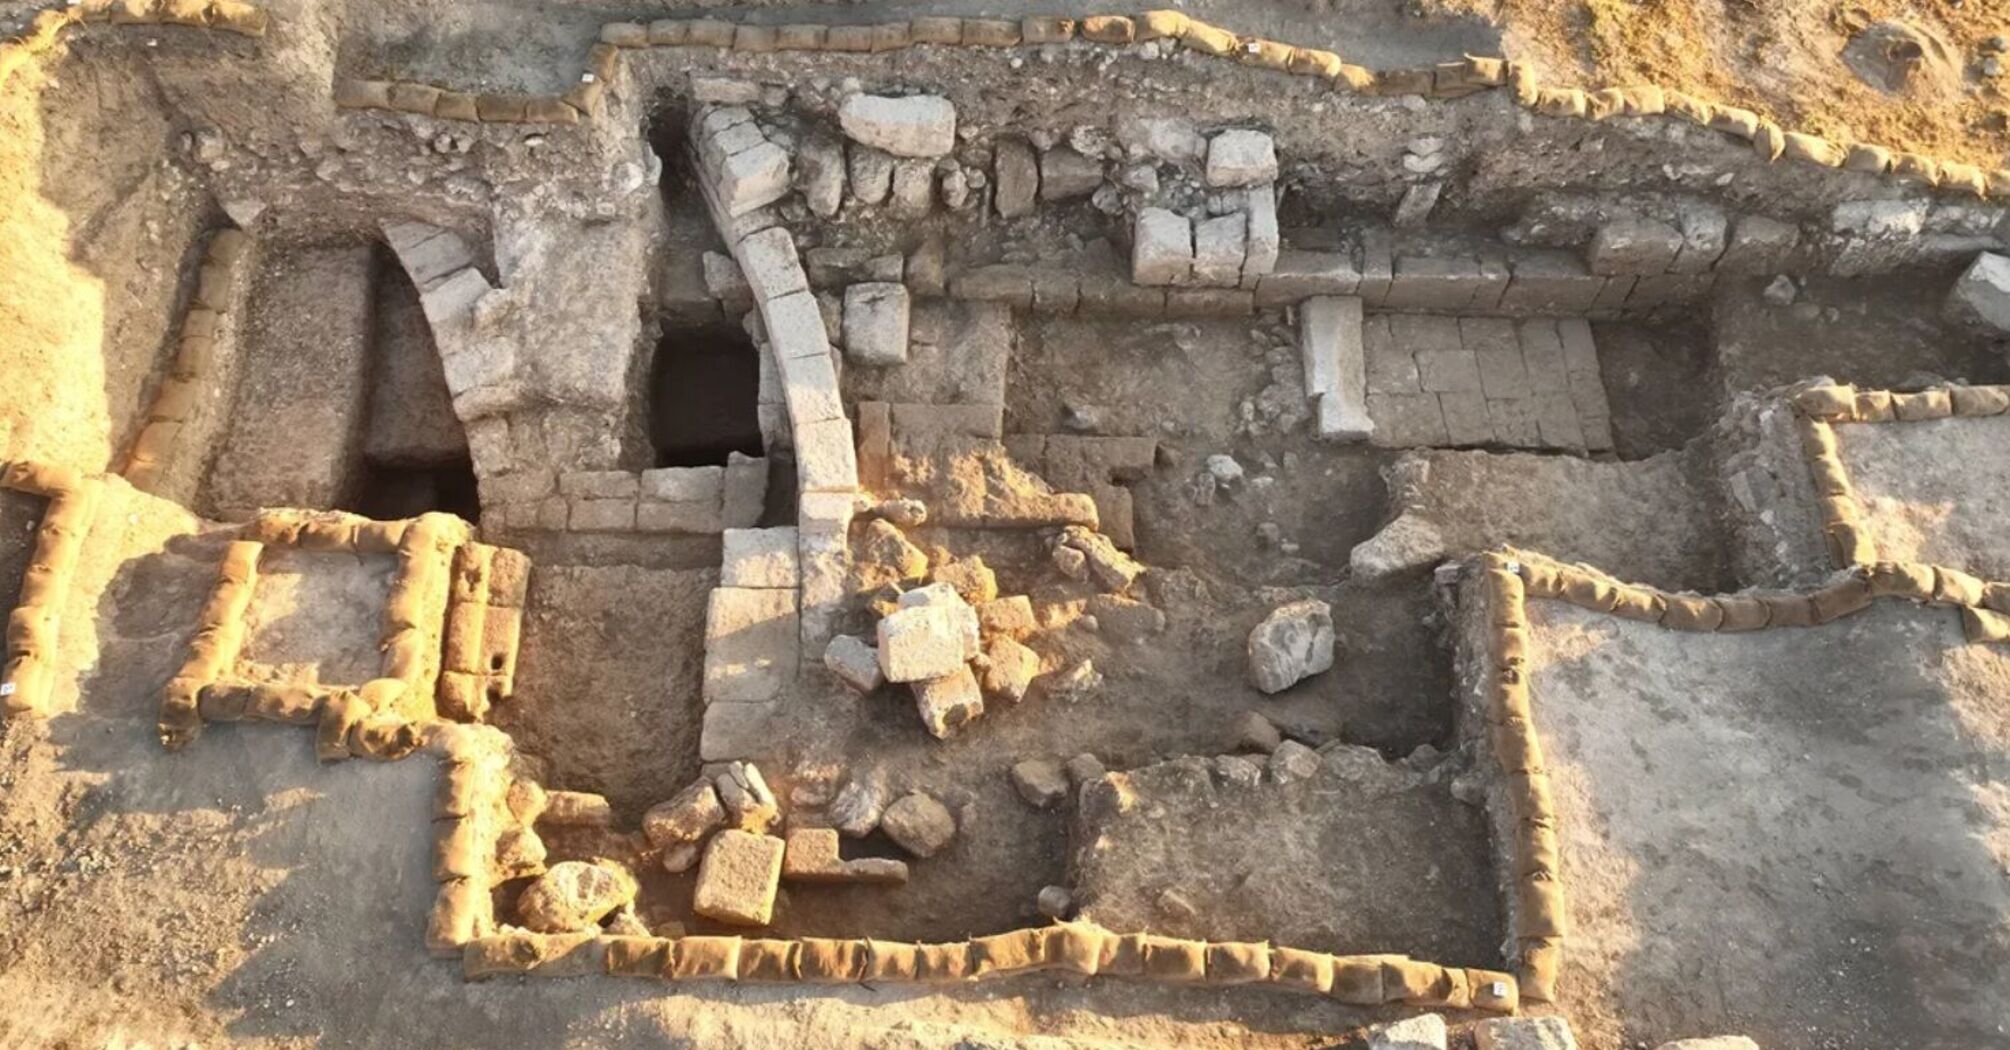 Blood-red walls of 1800-year-old Roman amphitheater unearthed near Armageddon in Israel (photo)